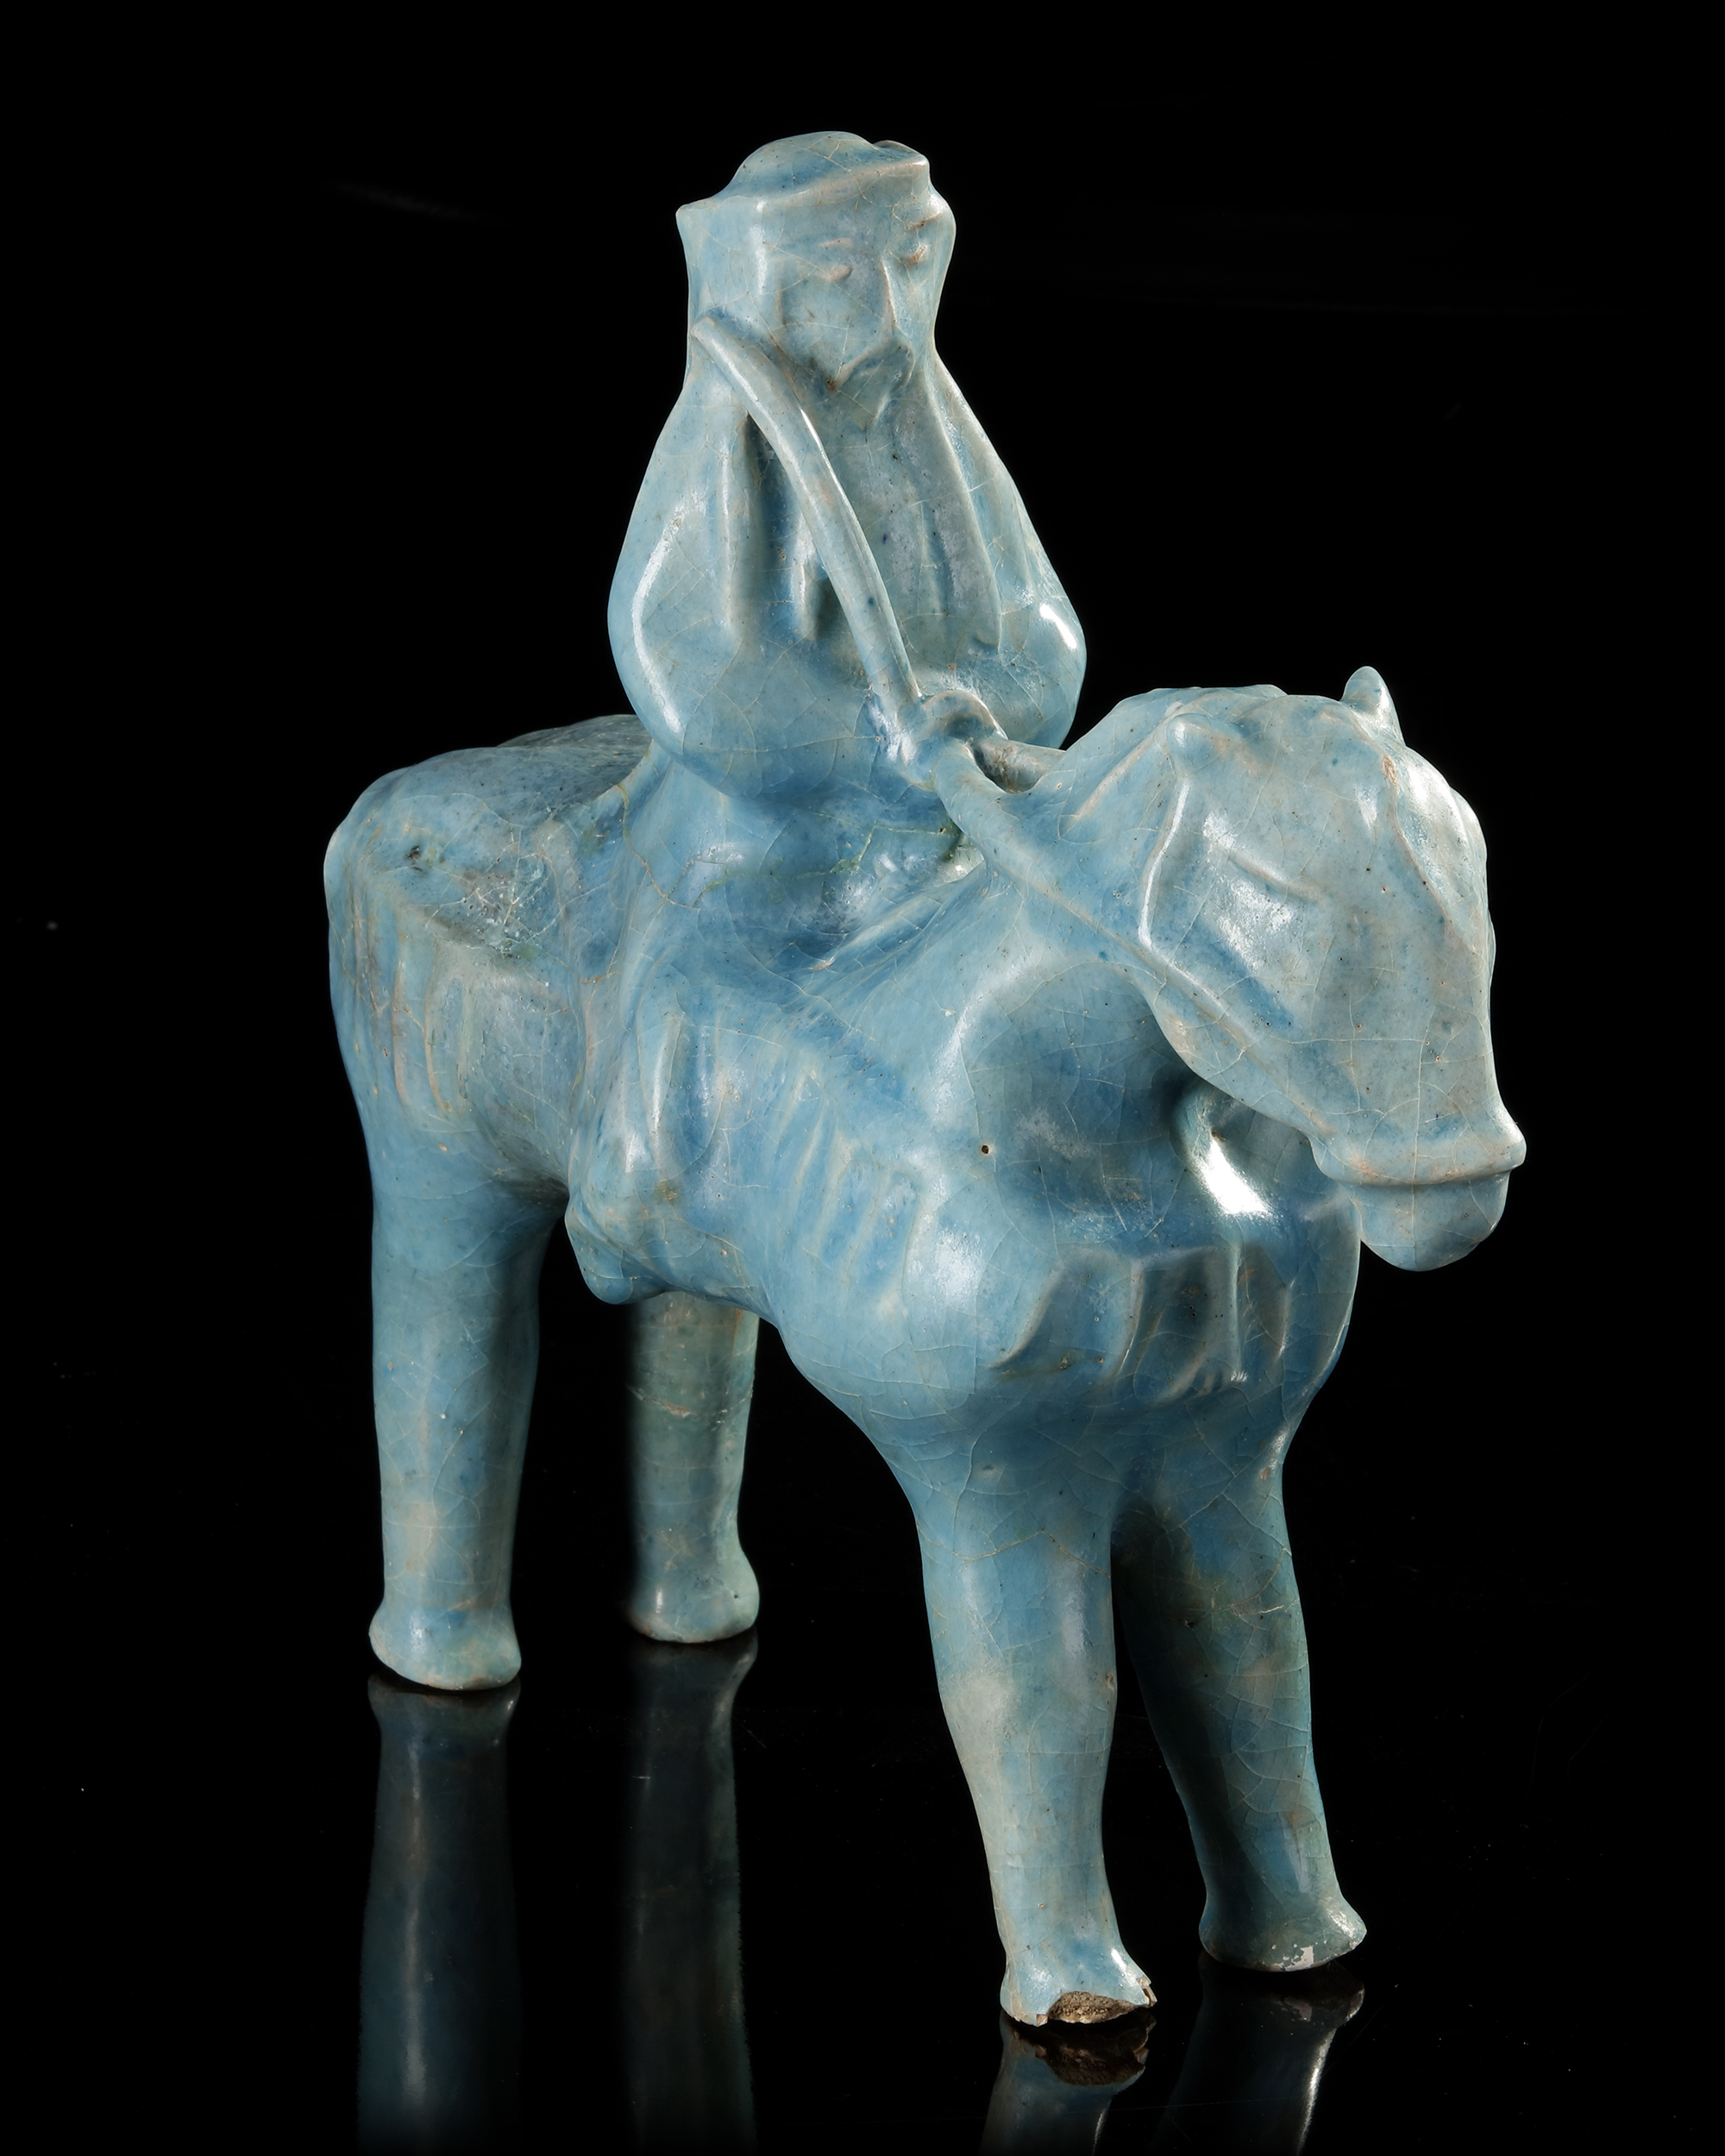 A RARE KASHAN TURQUOISE-GLAZED FIGURE OF A MONGOL, PERSIA, 13TH CENTURY - Image 6 of 7